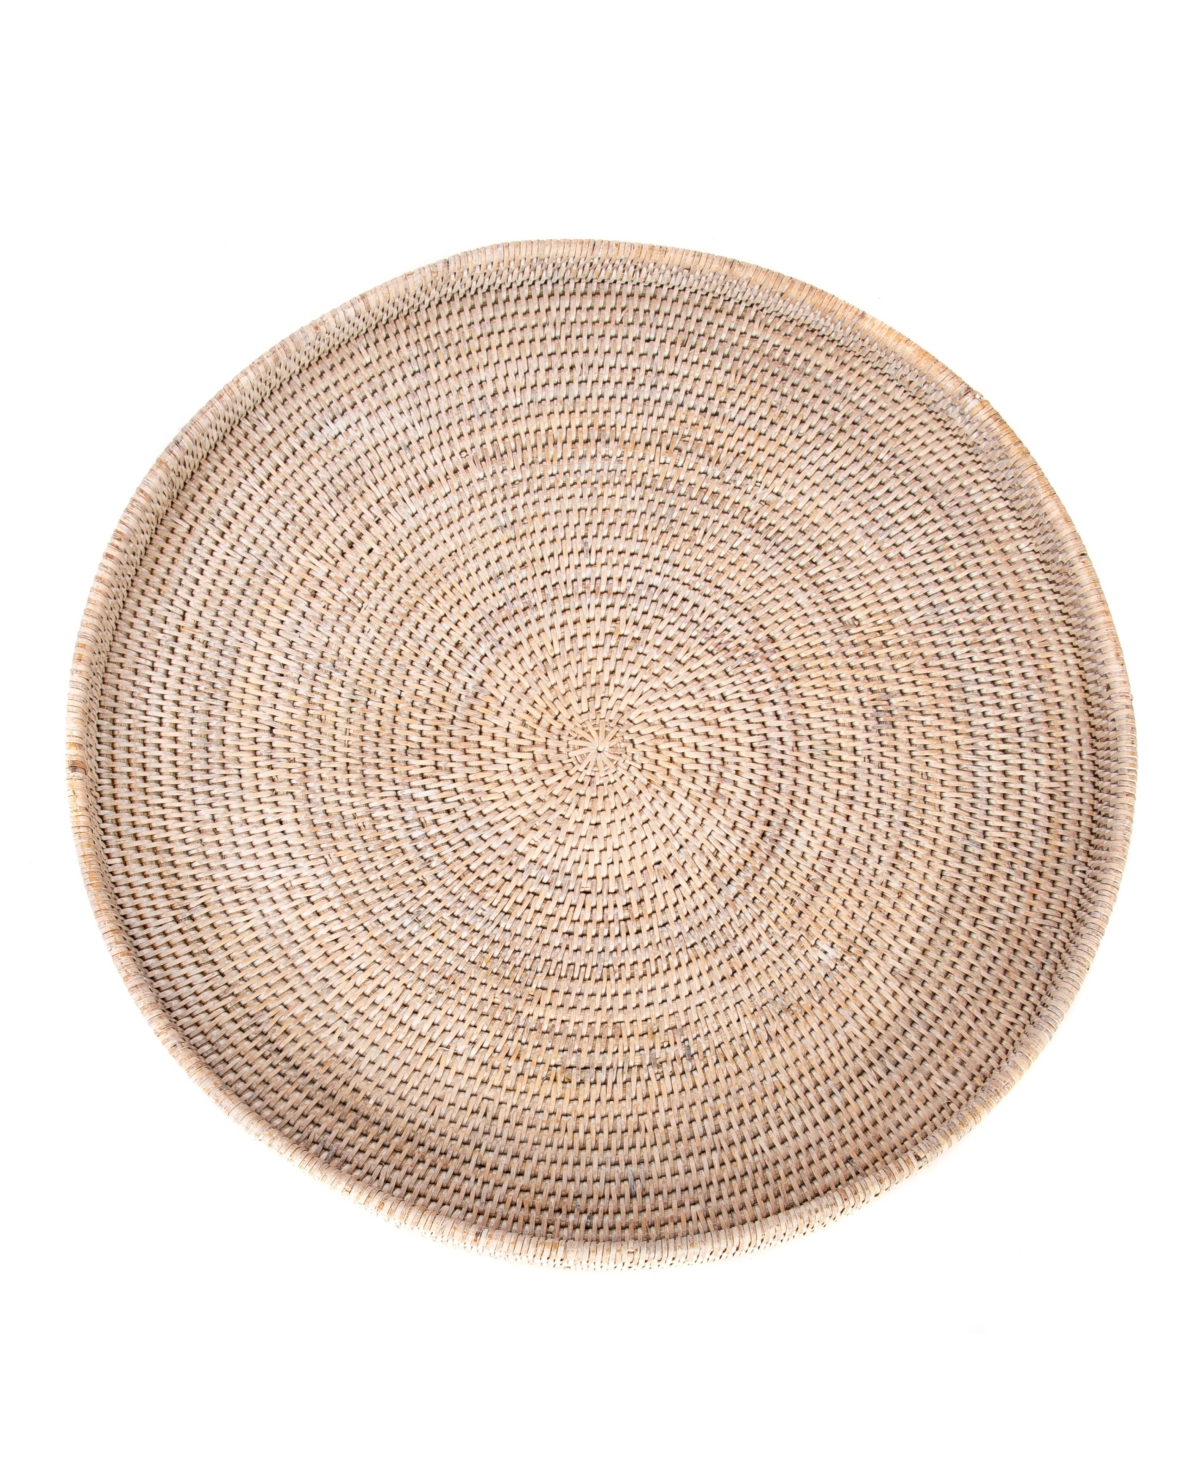 Shop Artifacts Trading Company Artifacts Rattan Round Tray In Off-white